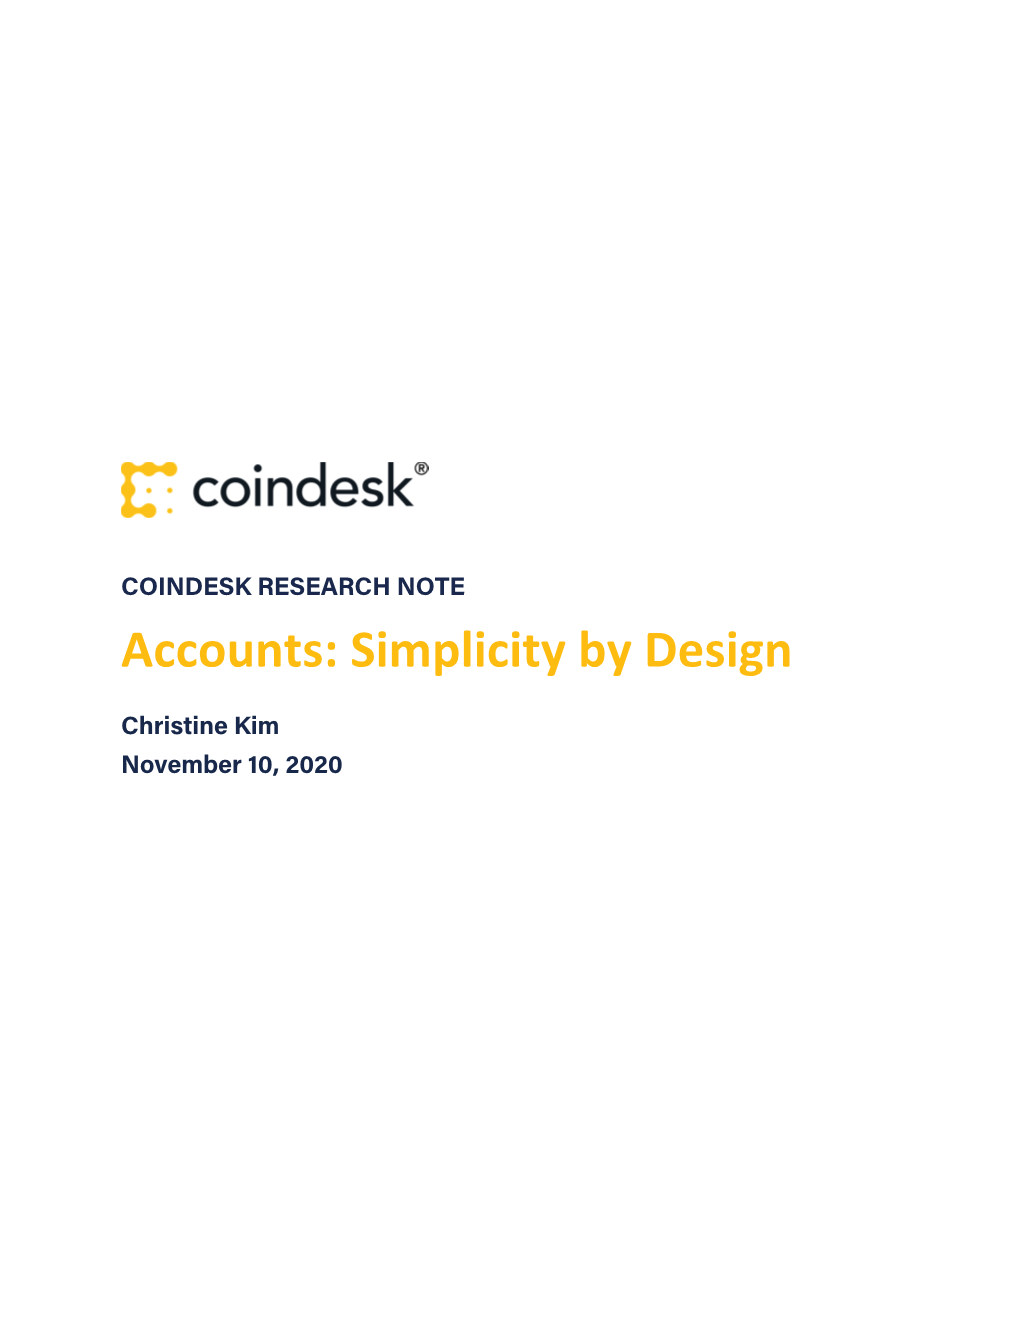 Accounts: Simplicity by Design